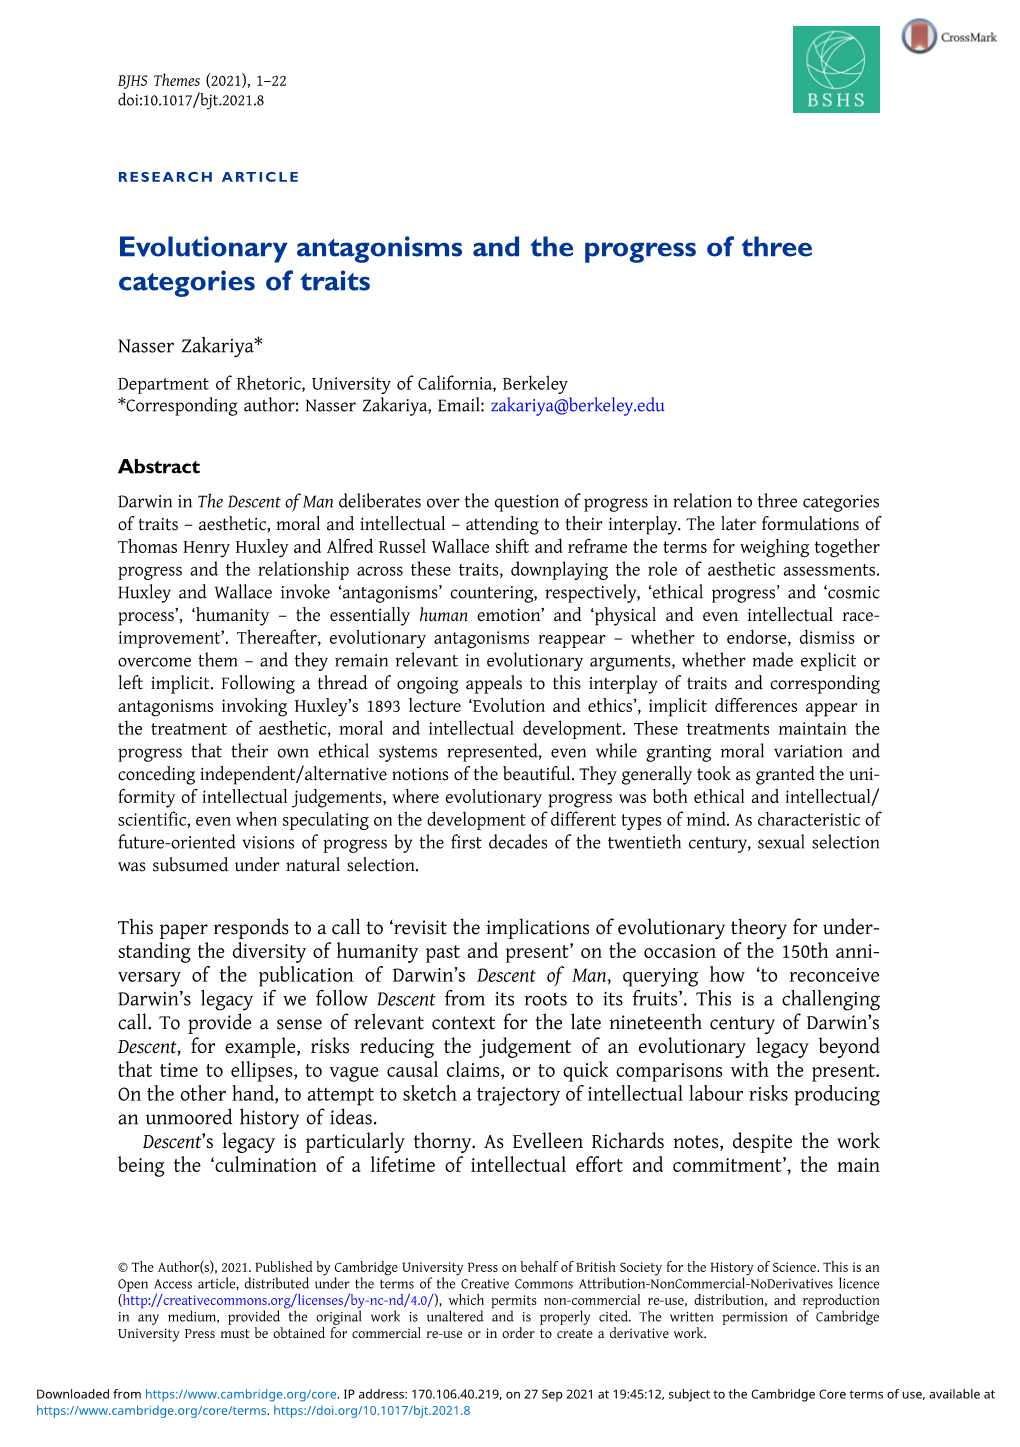 Evolutionary Antagonisms and the Progress of Three Categories of Traits